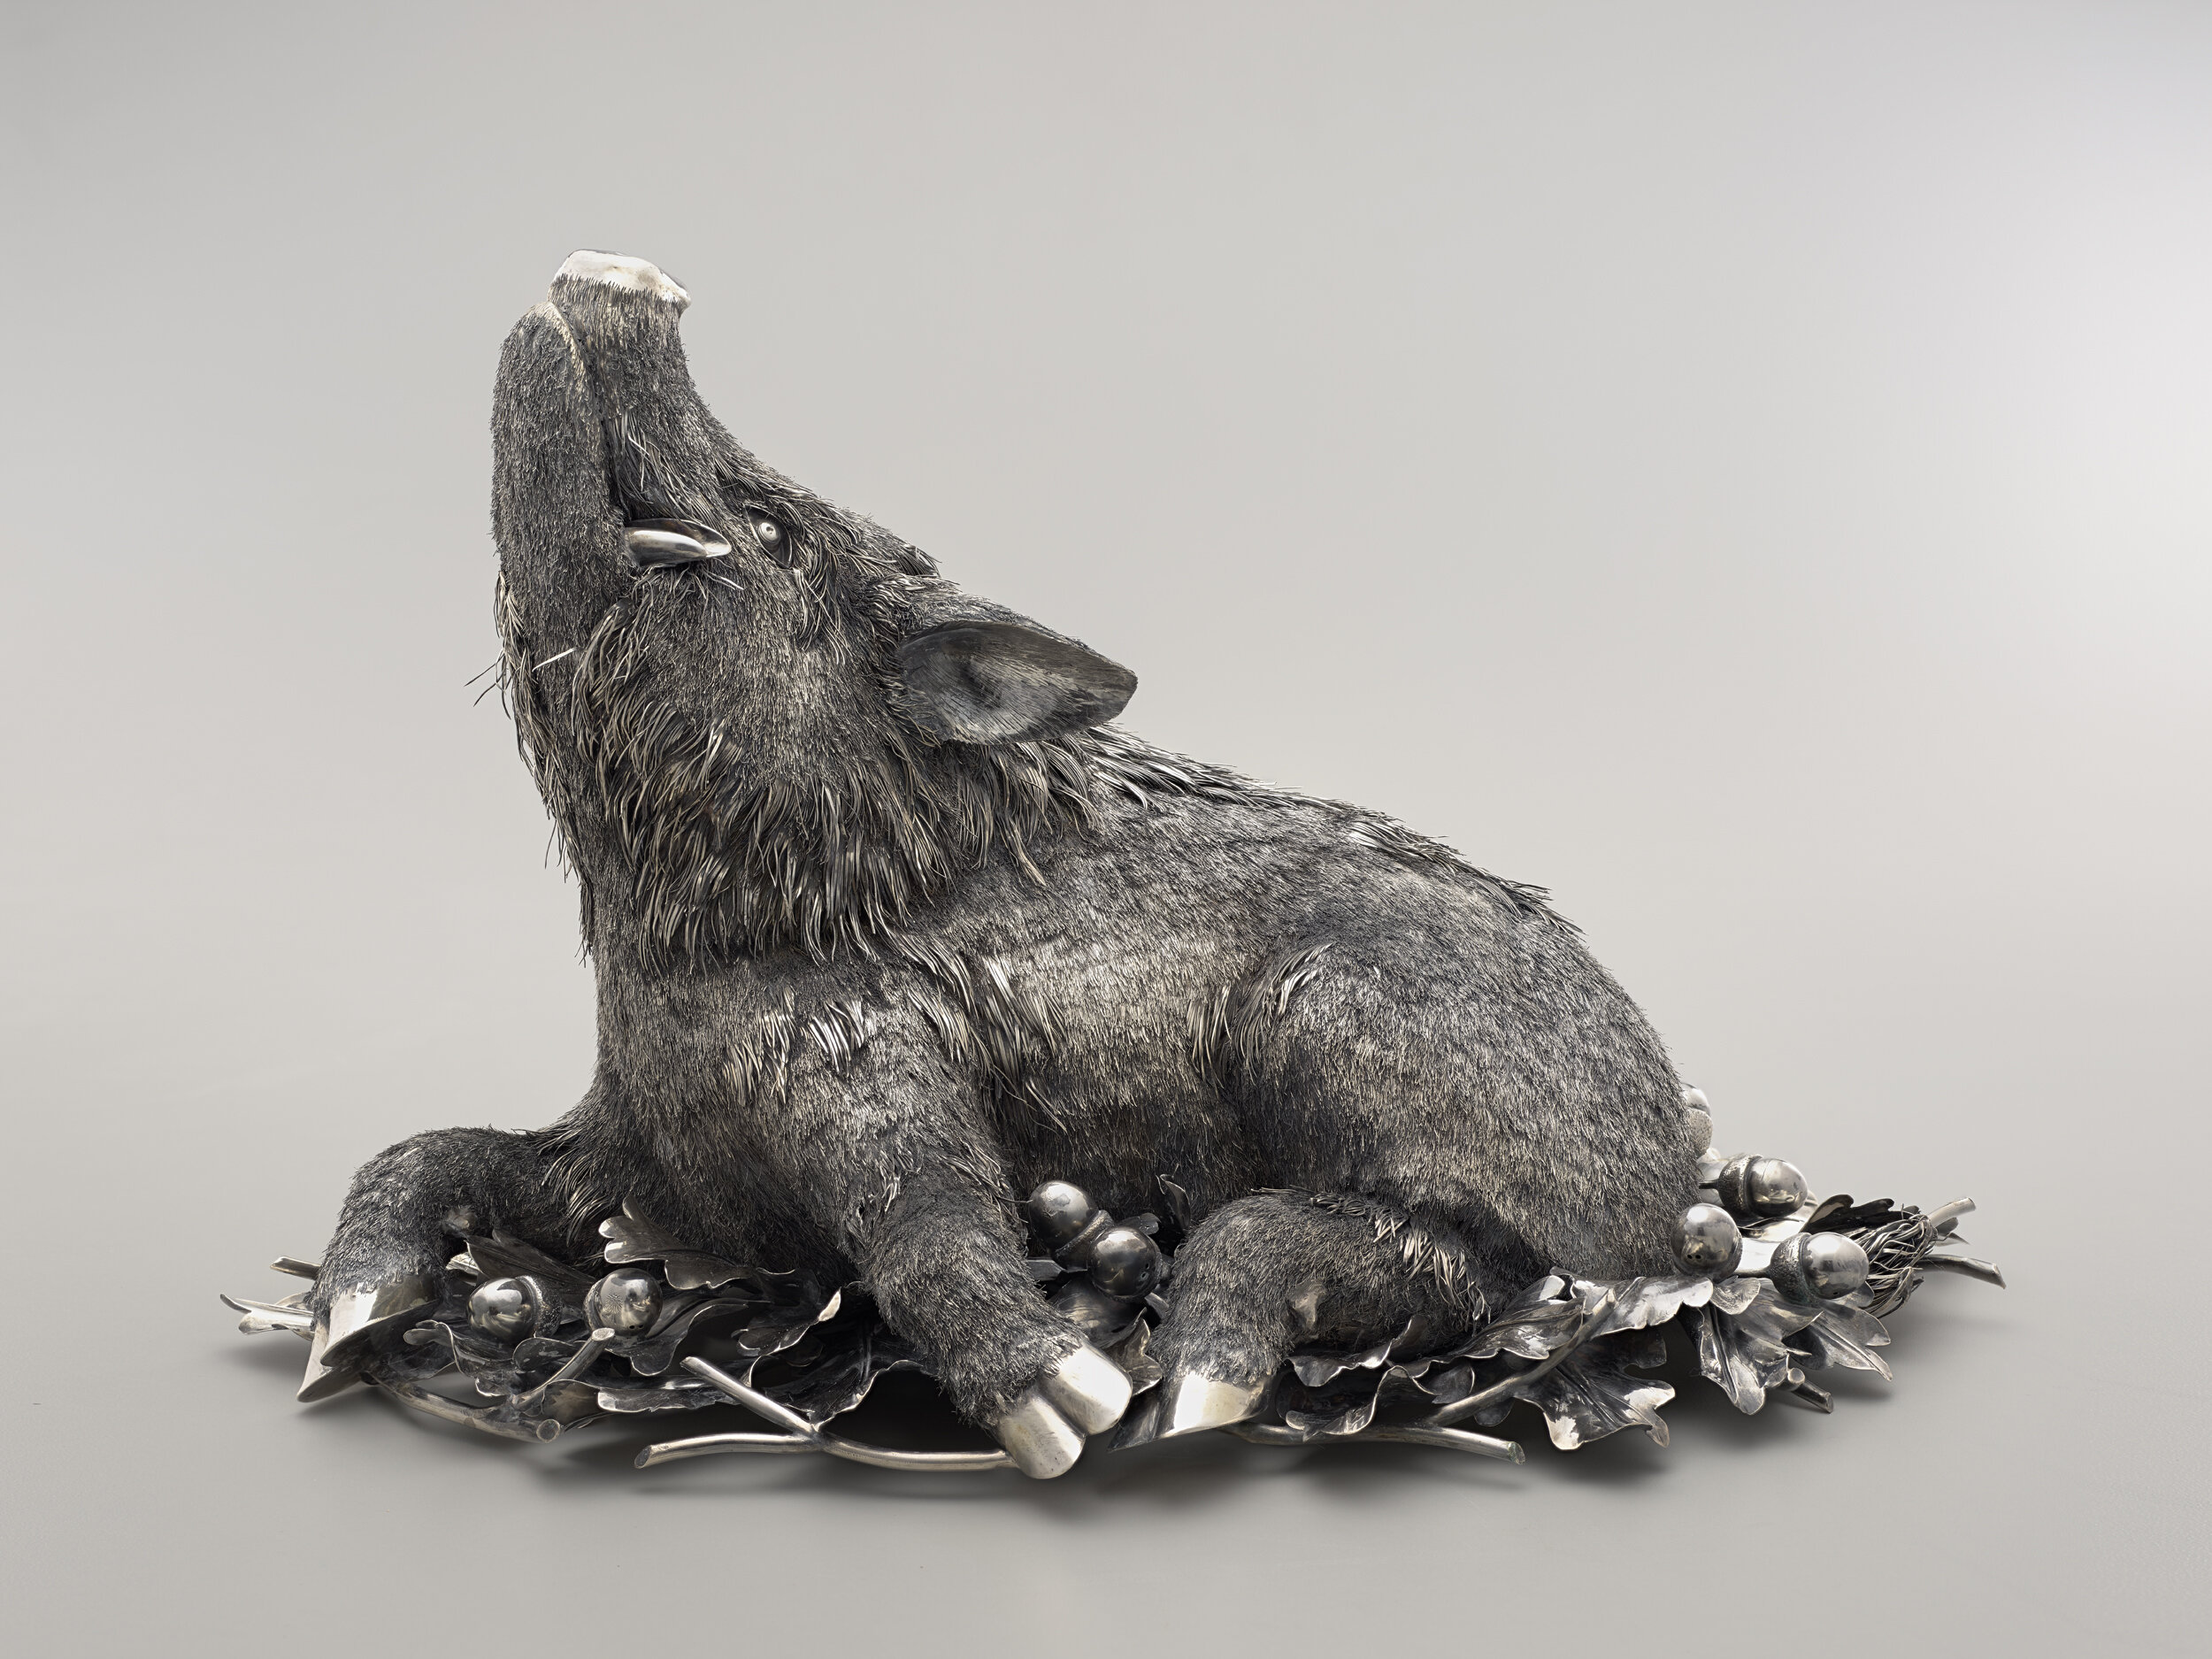  Gianmaria Buccellati, Boar, last half of 20th century, sterling silver, The Carol and Seymour Haber Collection, © unknown, research required, 2008.82 